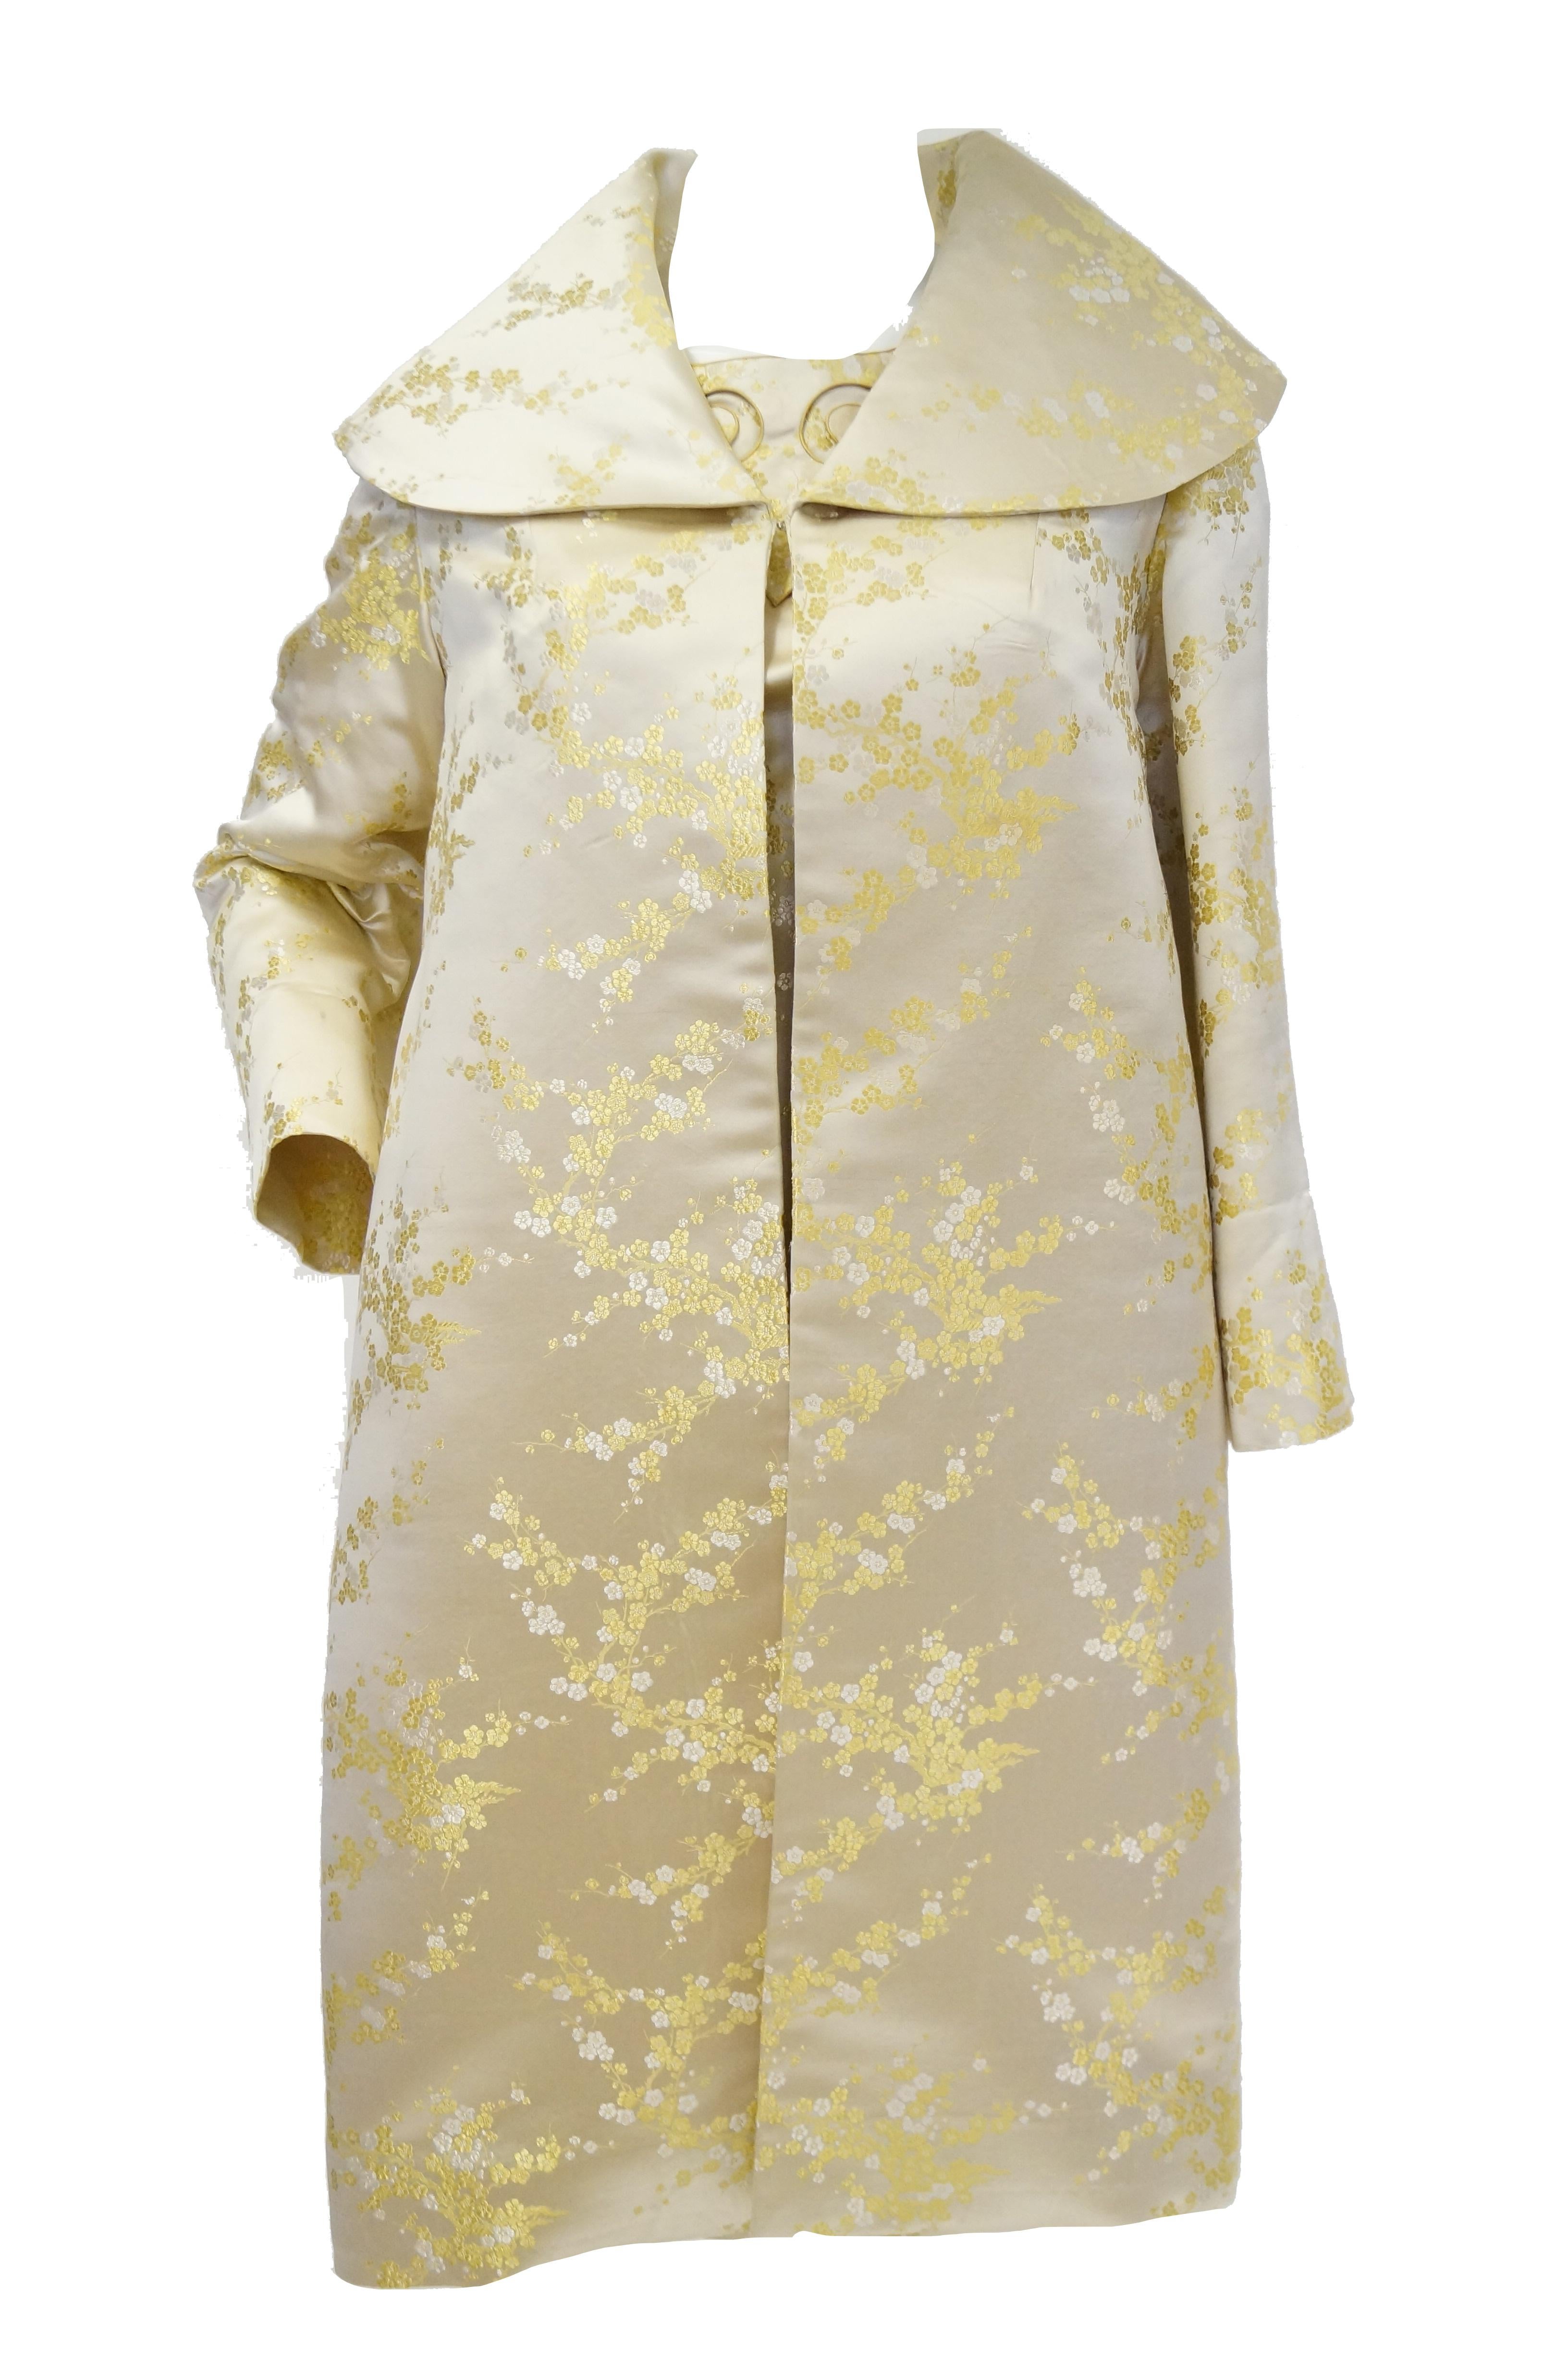  1960s Hong Kong Gold Cherry Blossom Floral Brocade Cocktail Dress and Coat For Sale 5